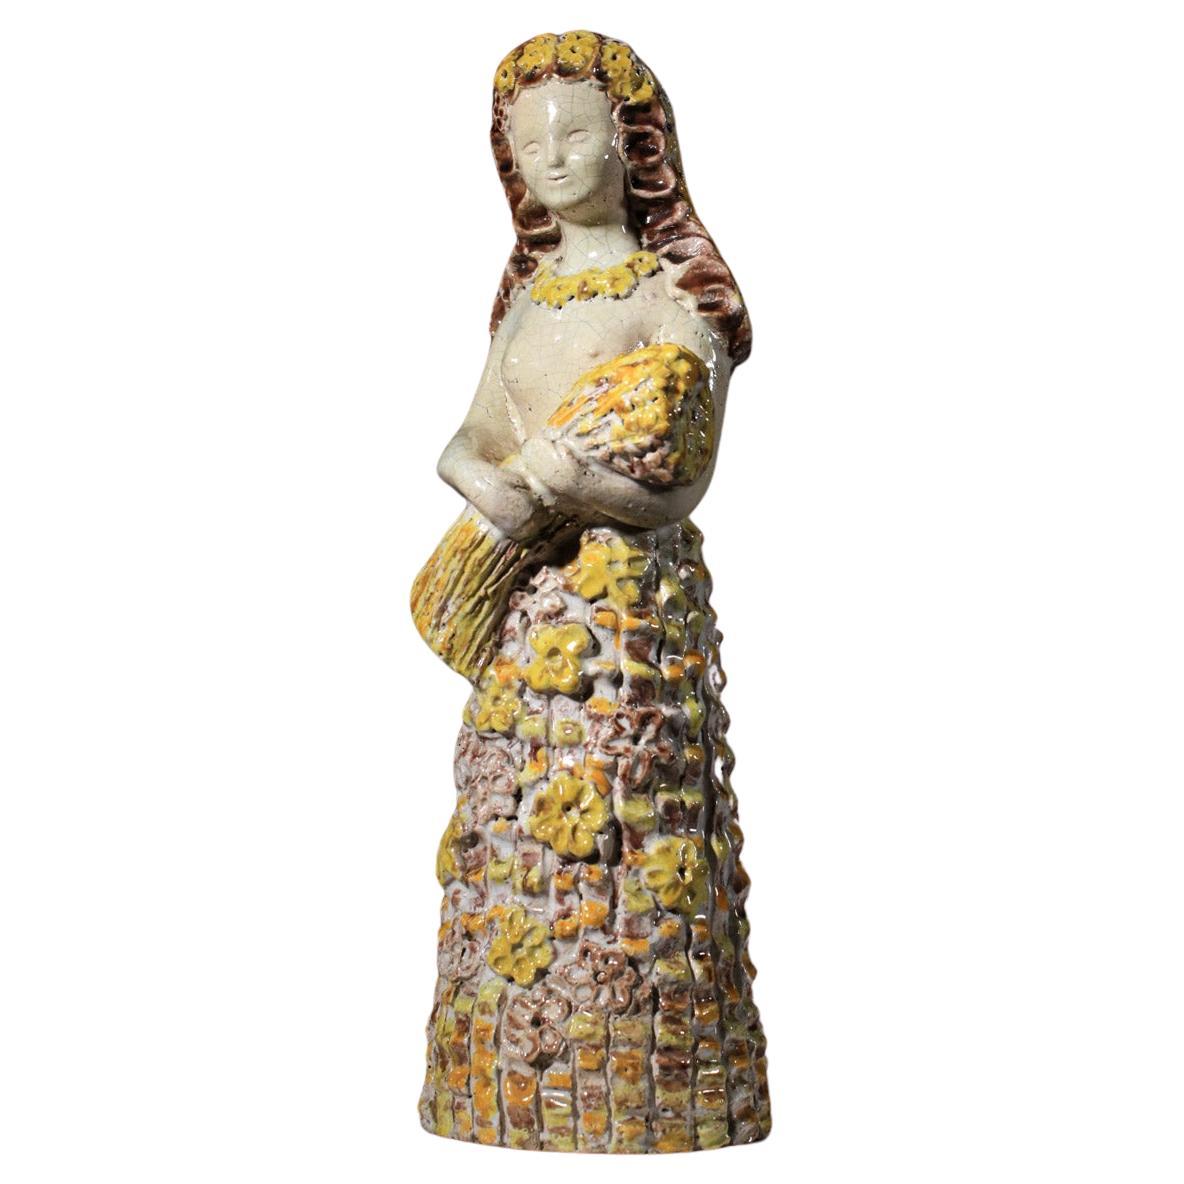 Ceramic goddess by Denise Picard from the Paul Pouchol workshop George Jove For Sale